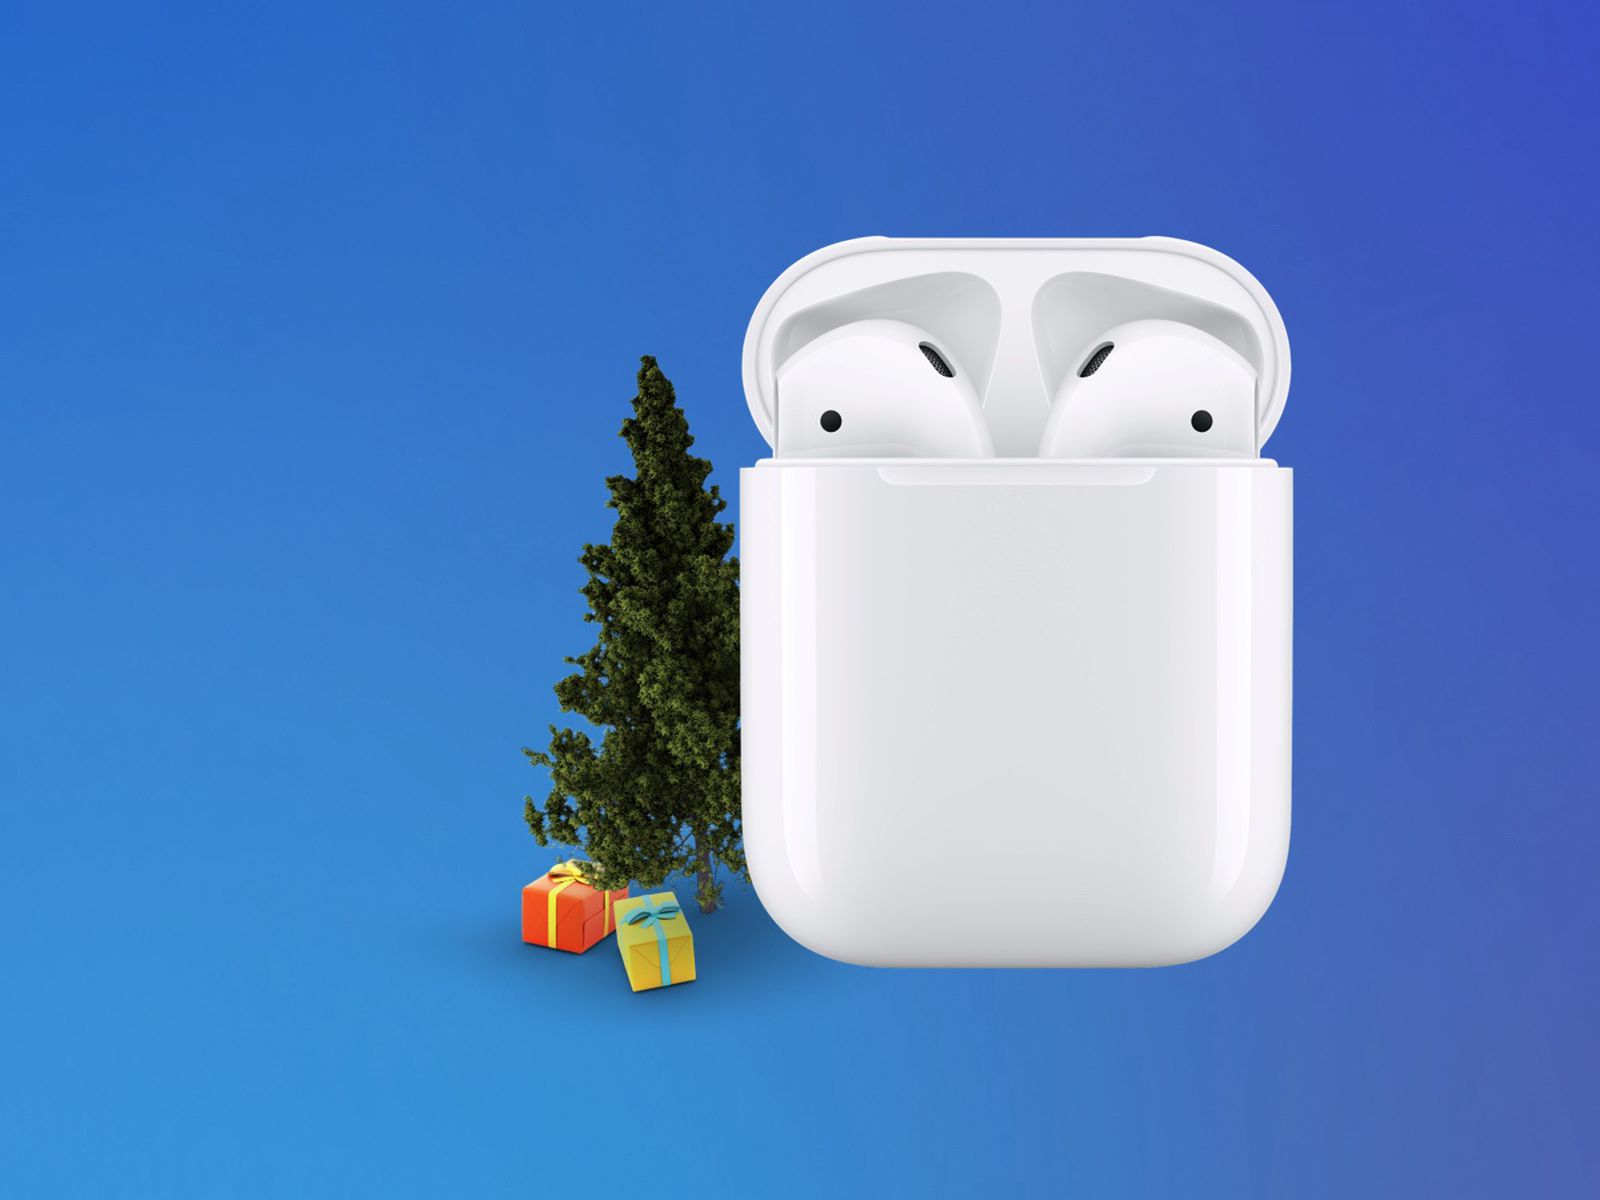 Deals: AirPods 2 Return to Black Price of $99.99 With Christmas Delivery - MacRumors